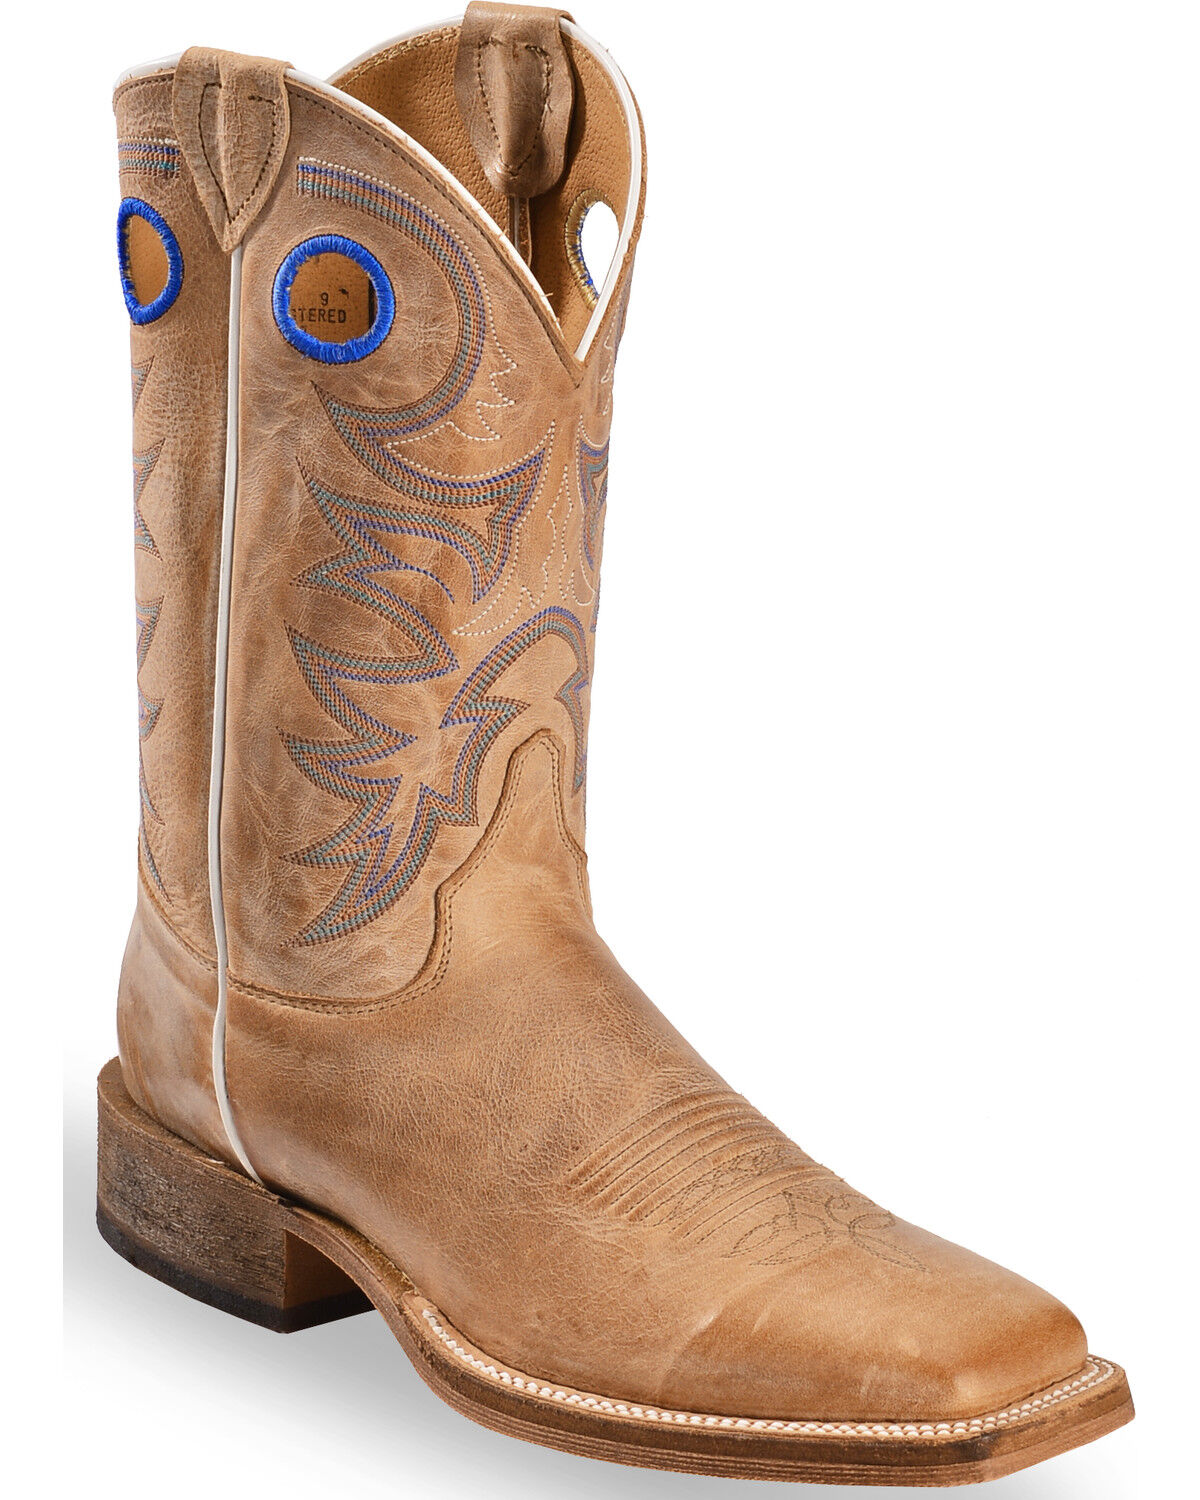 mens justin boots on sale